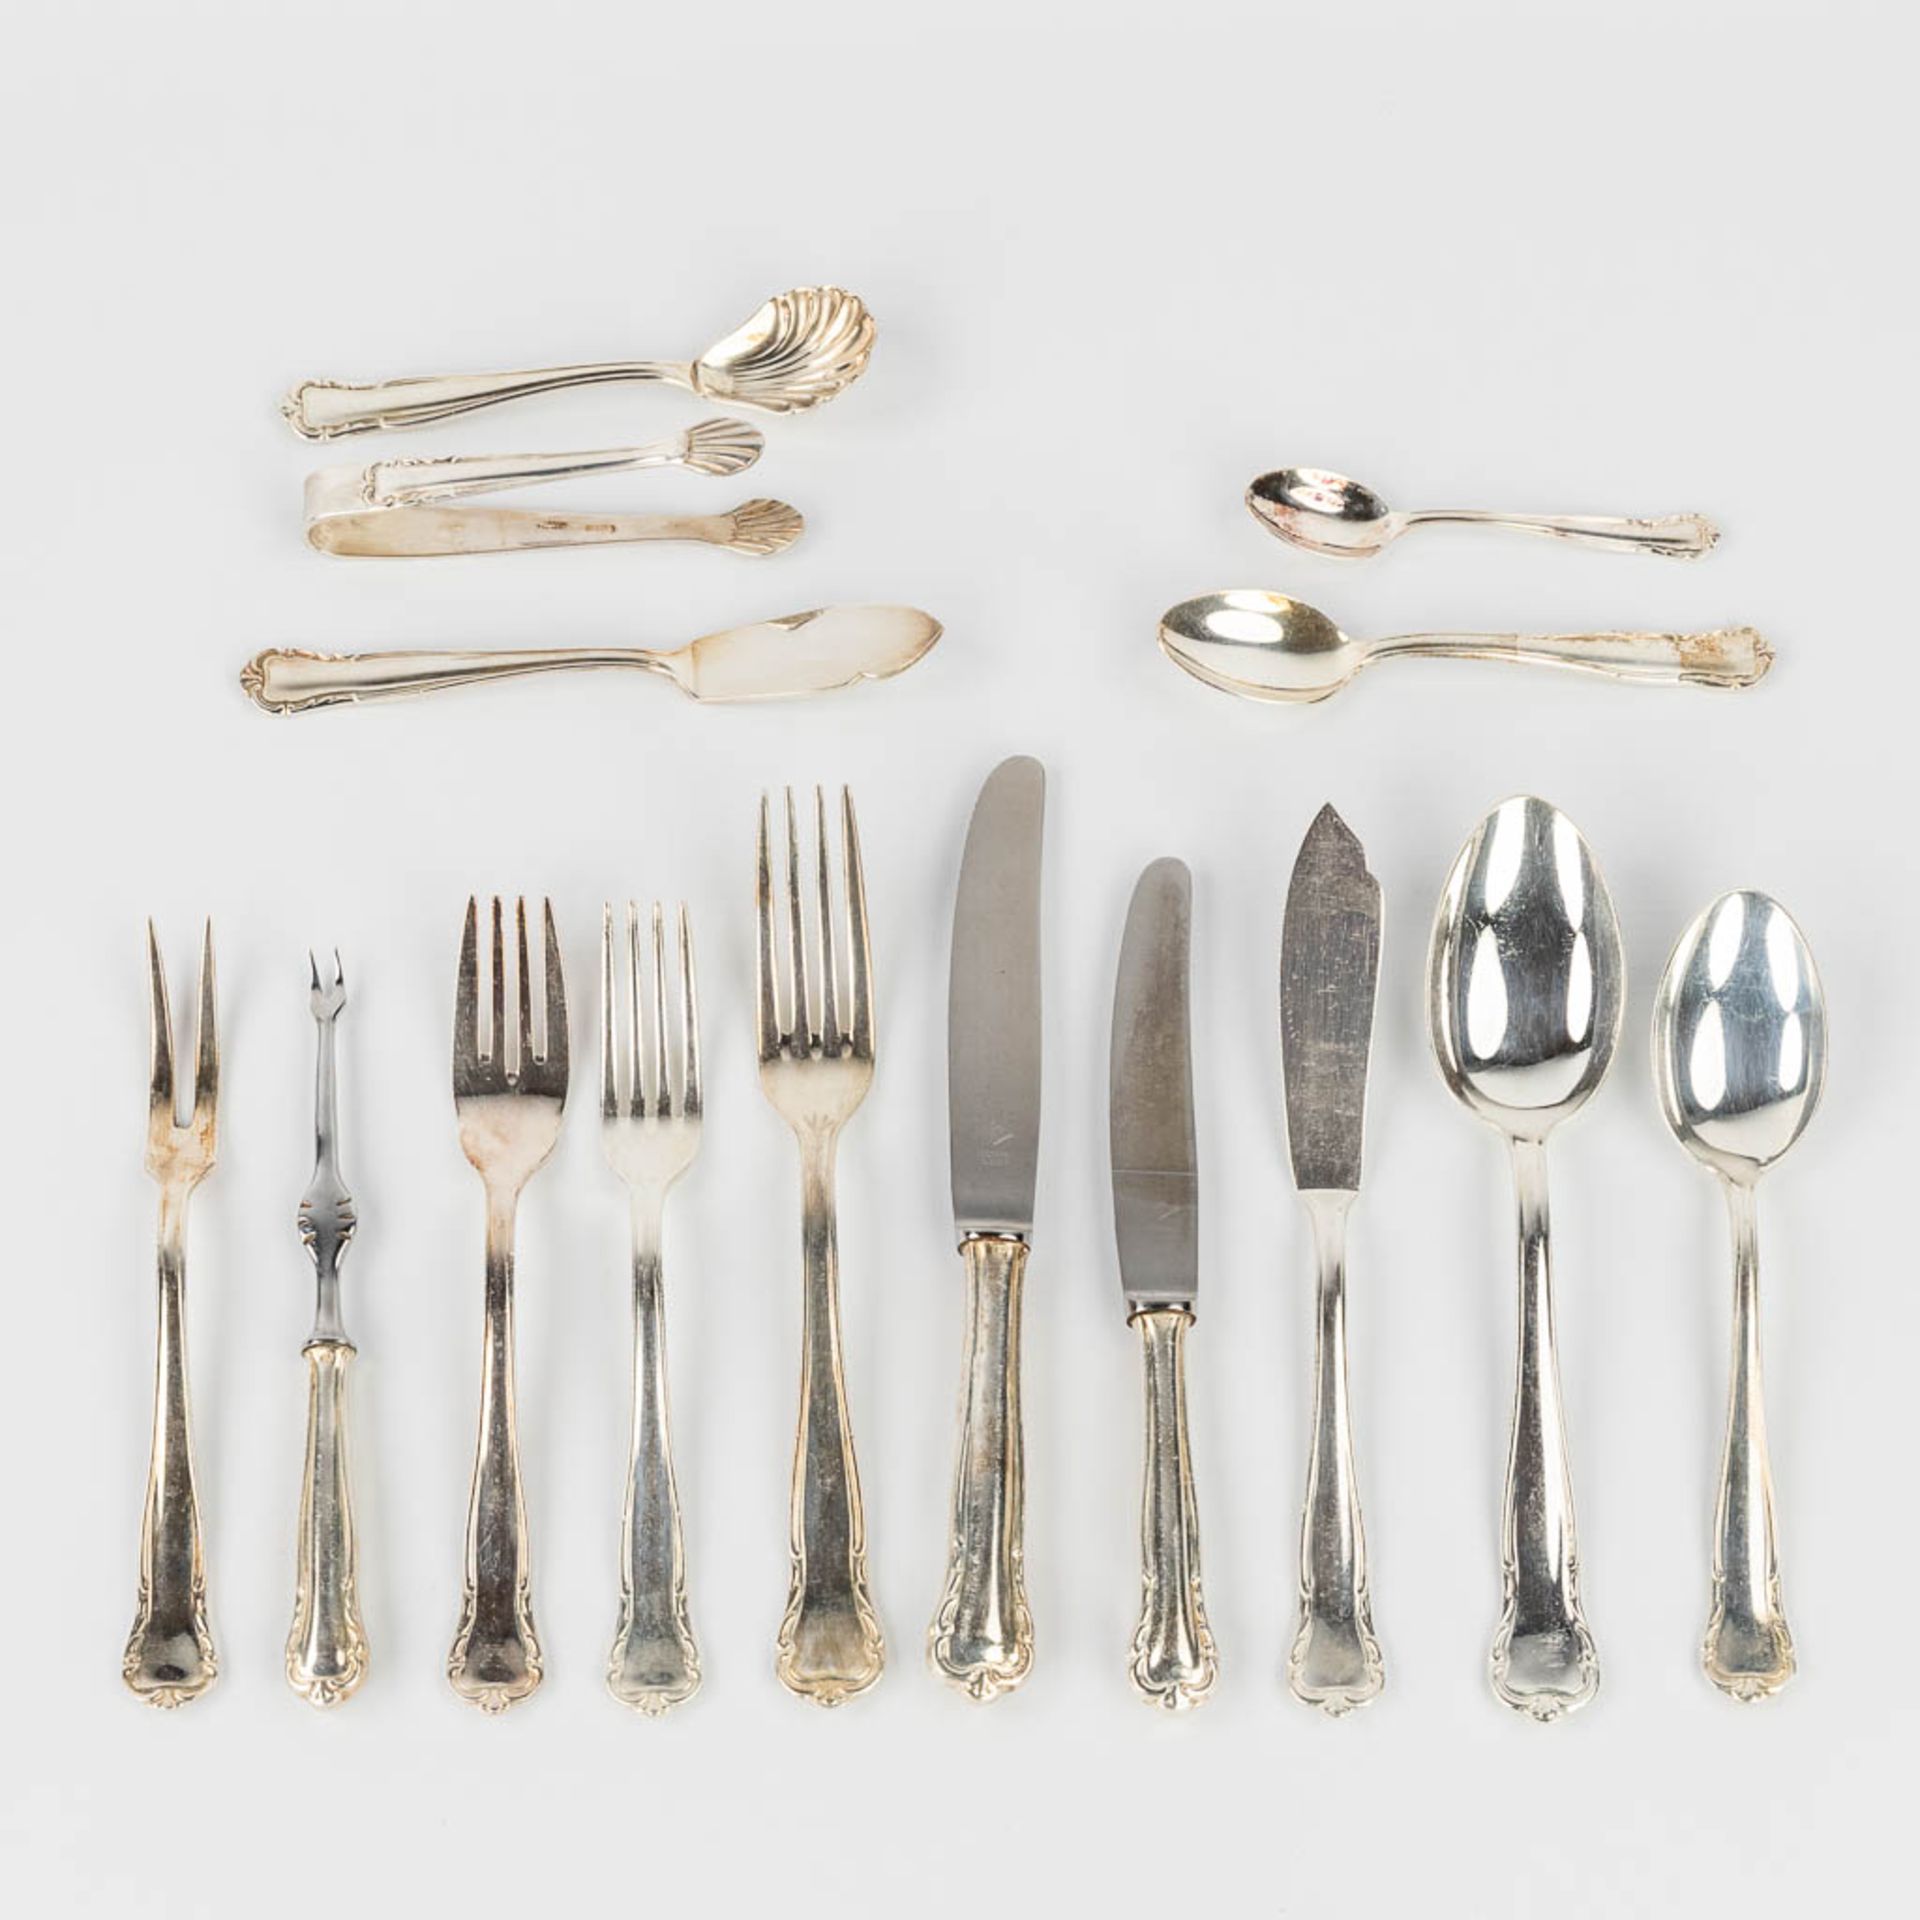 A 148-piece silver cutlery set in a chest, made in Germany. 6585g. (L:34 x W:46 x H:31 cm) - Image 7 of 12